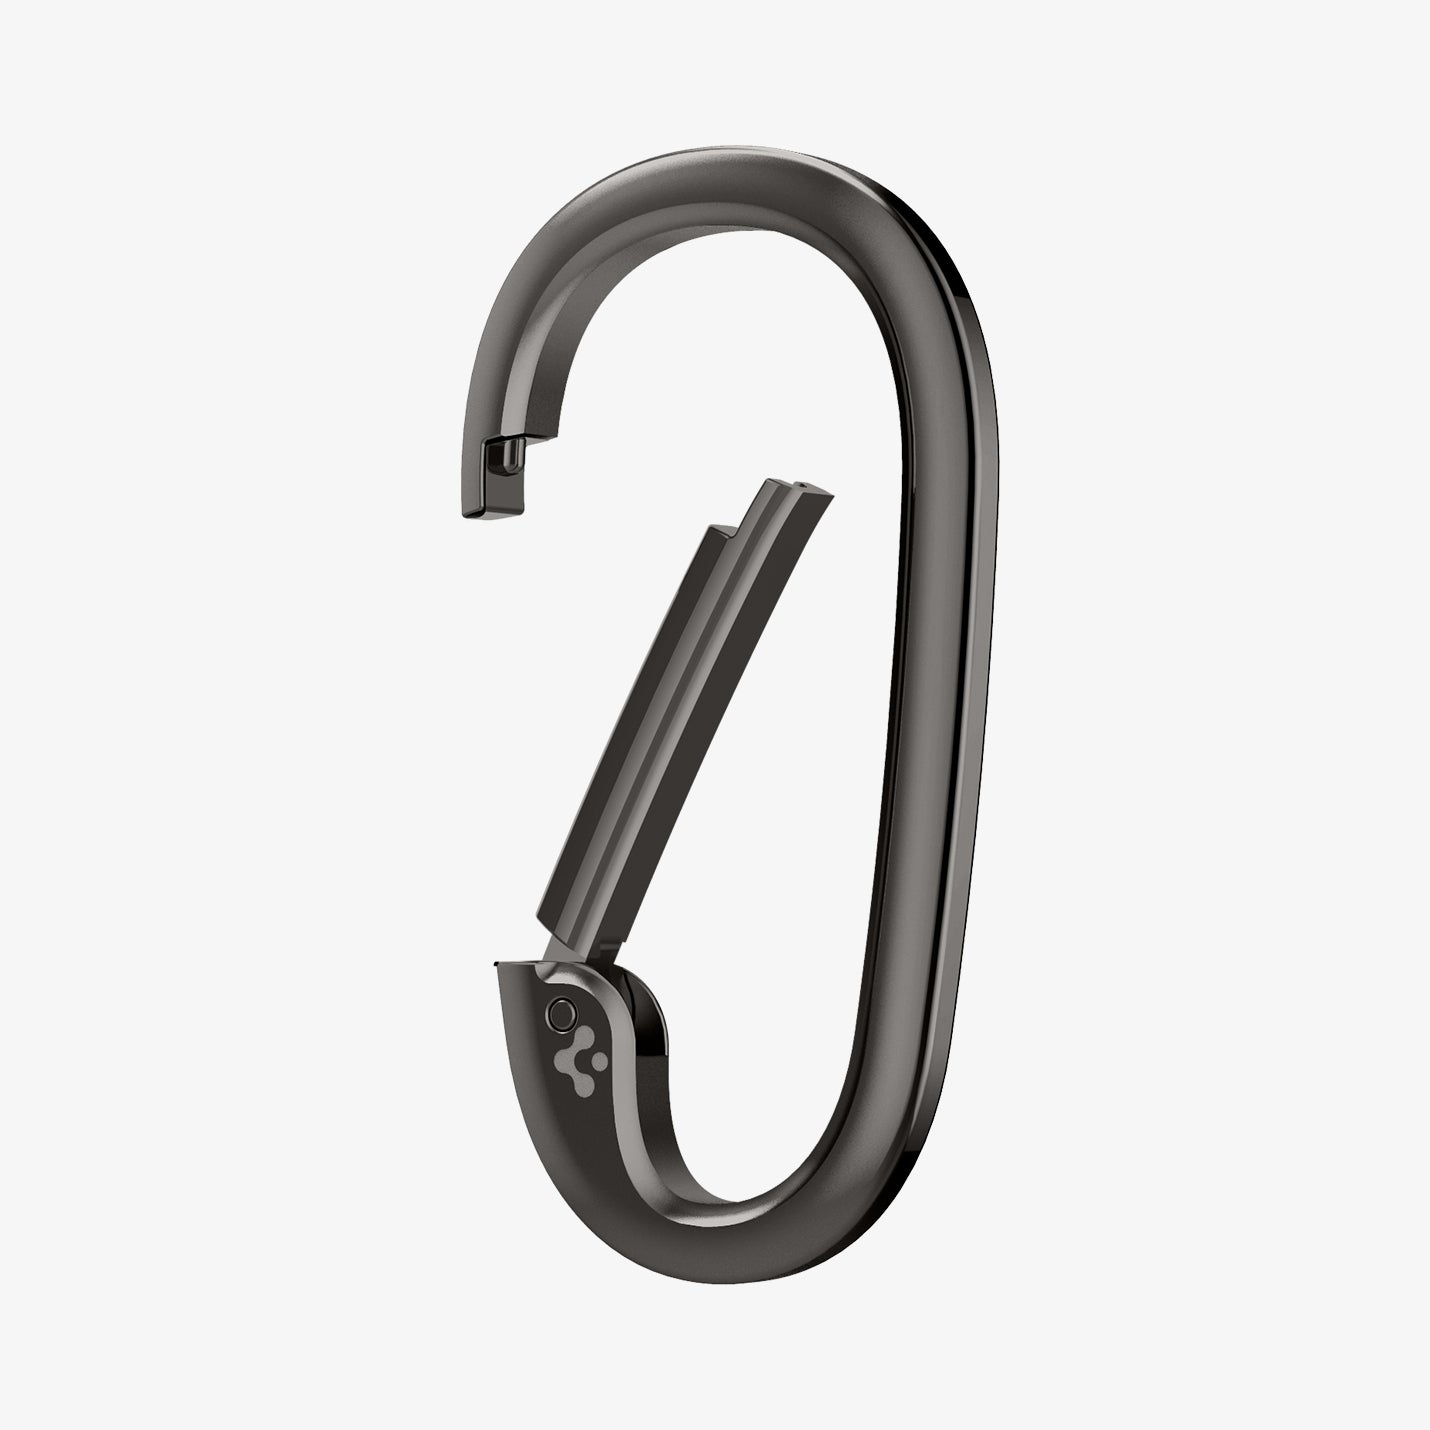 AHP02932 - Carabiner Basic Type in black showing the front and side with carabiner open